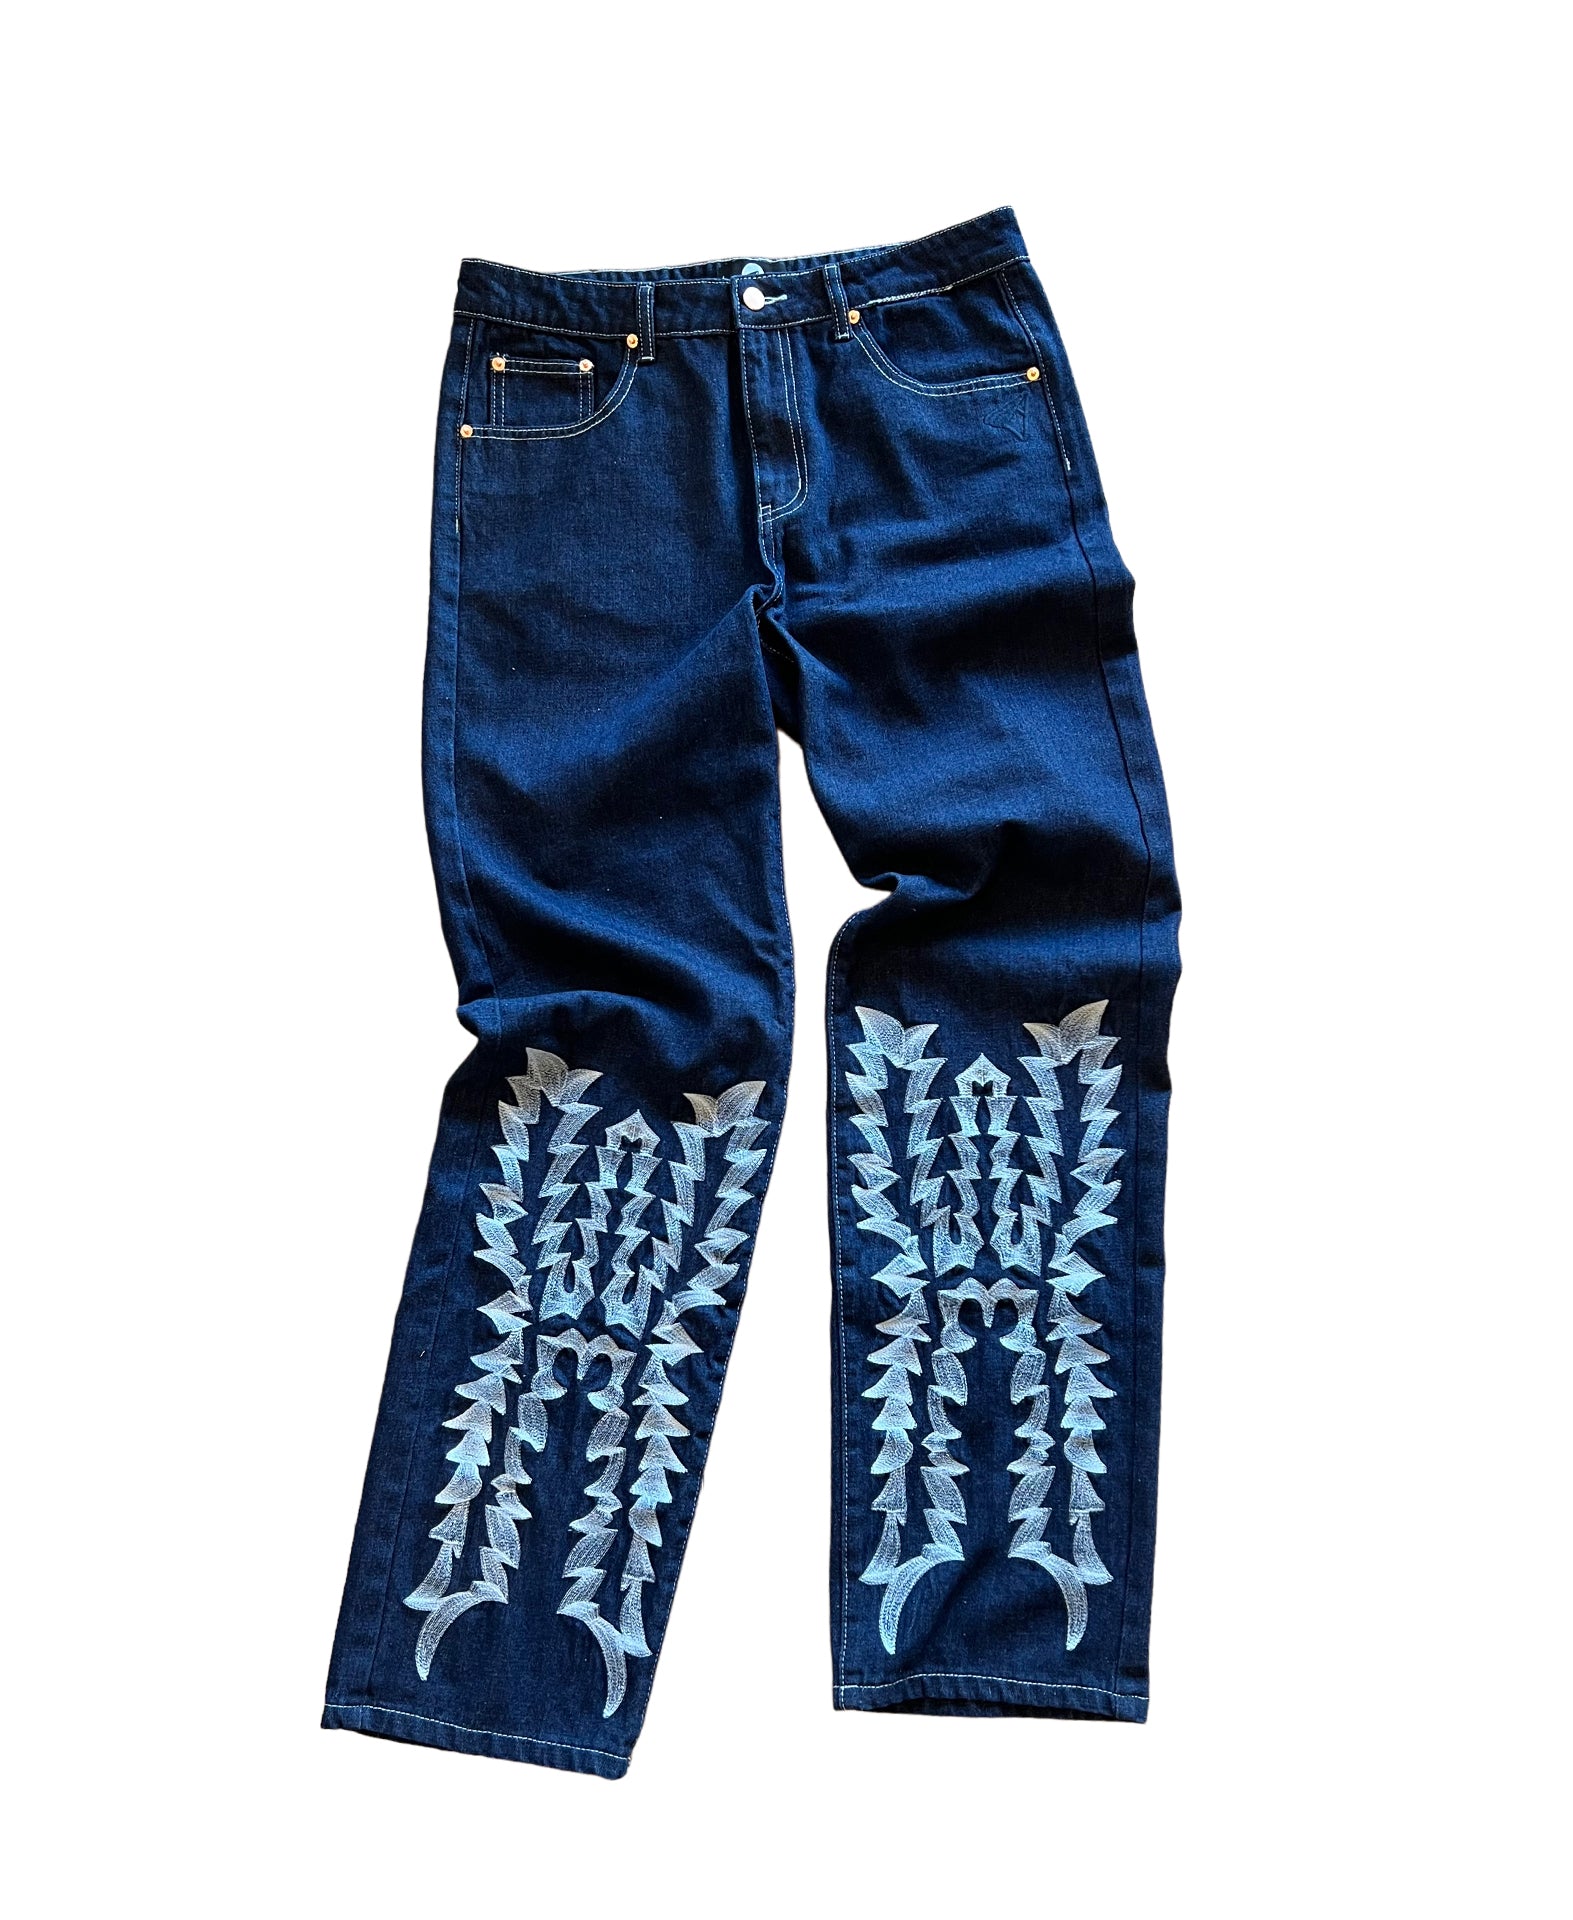 Thorn jeans - Sample